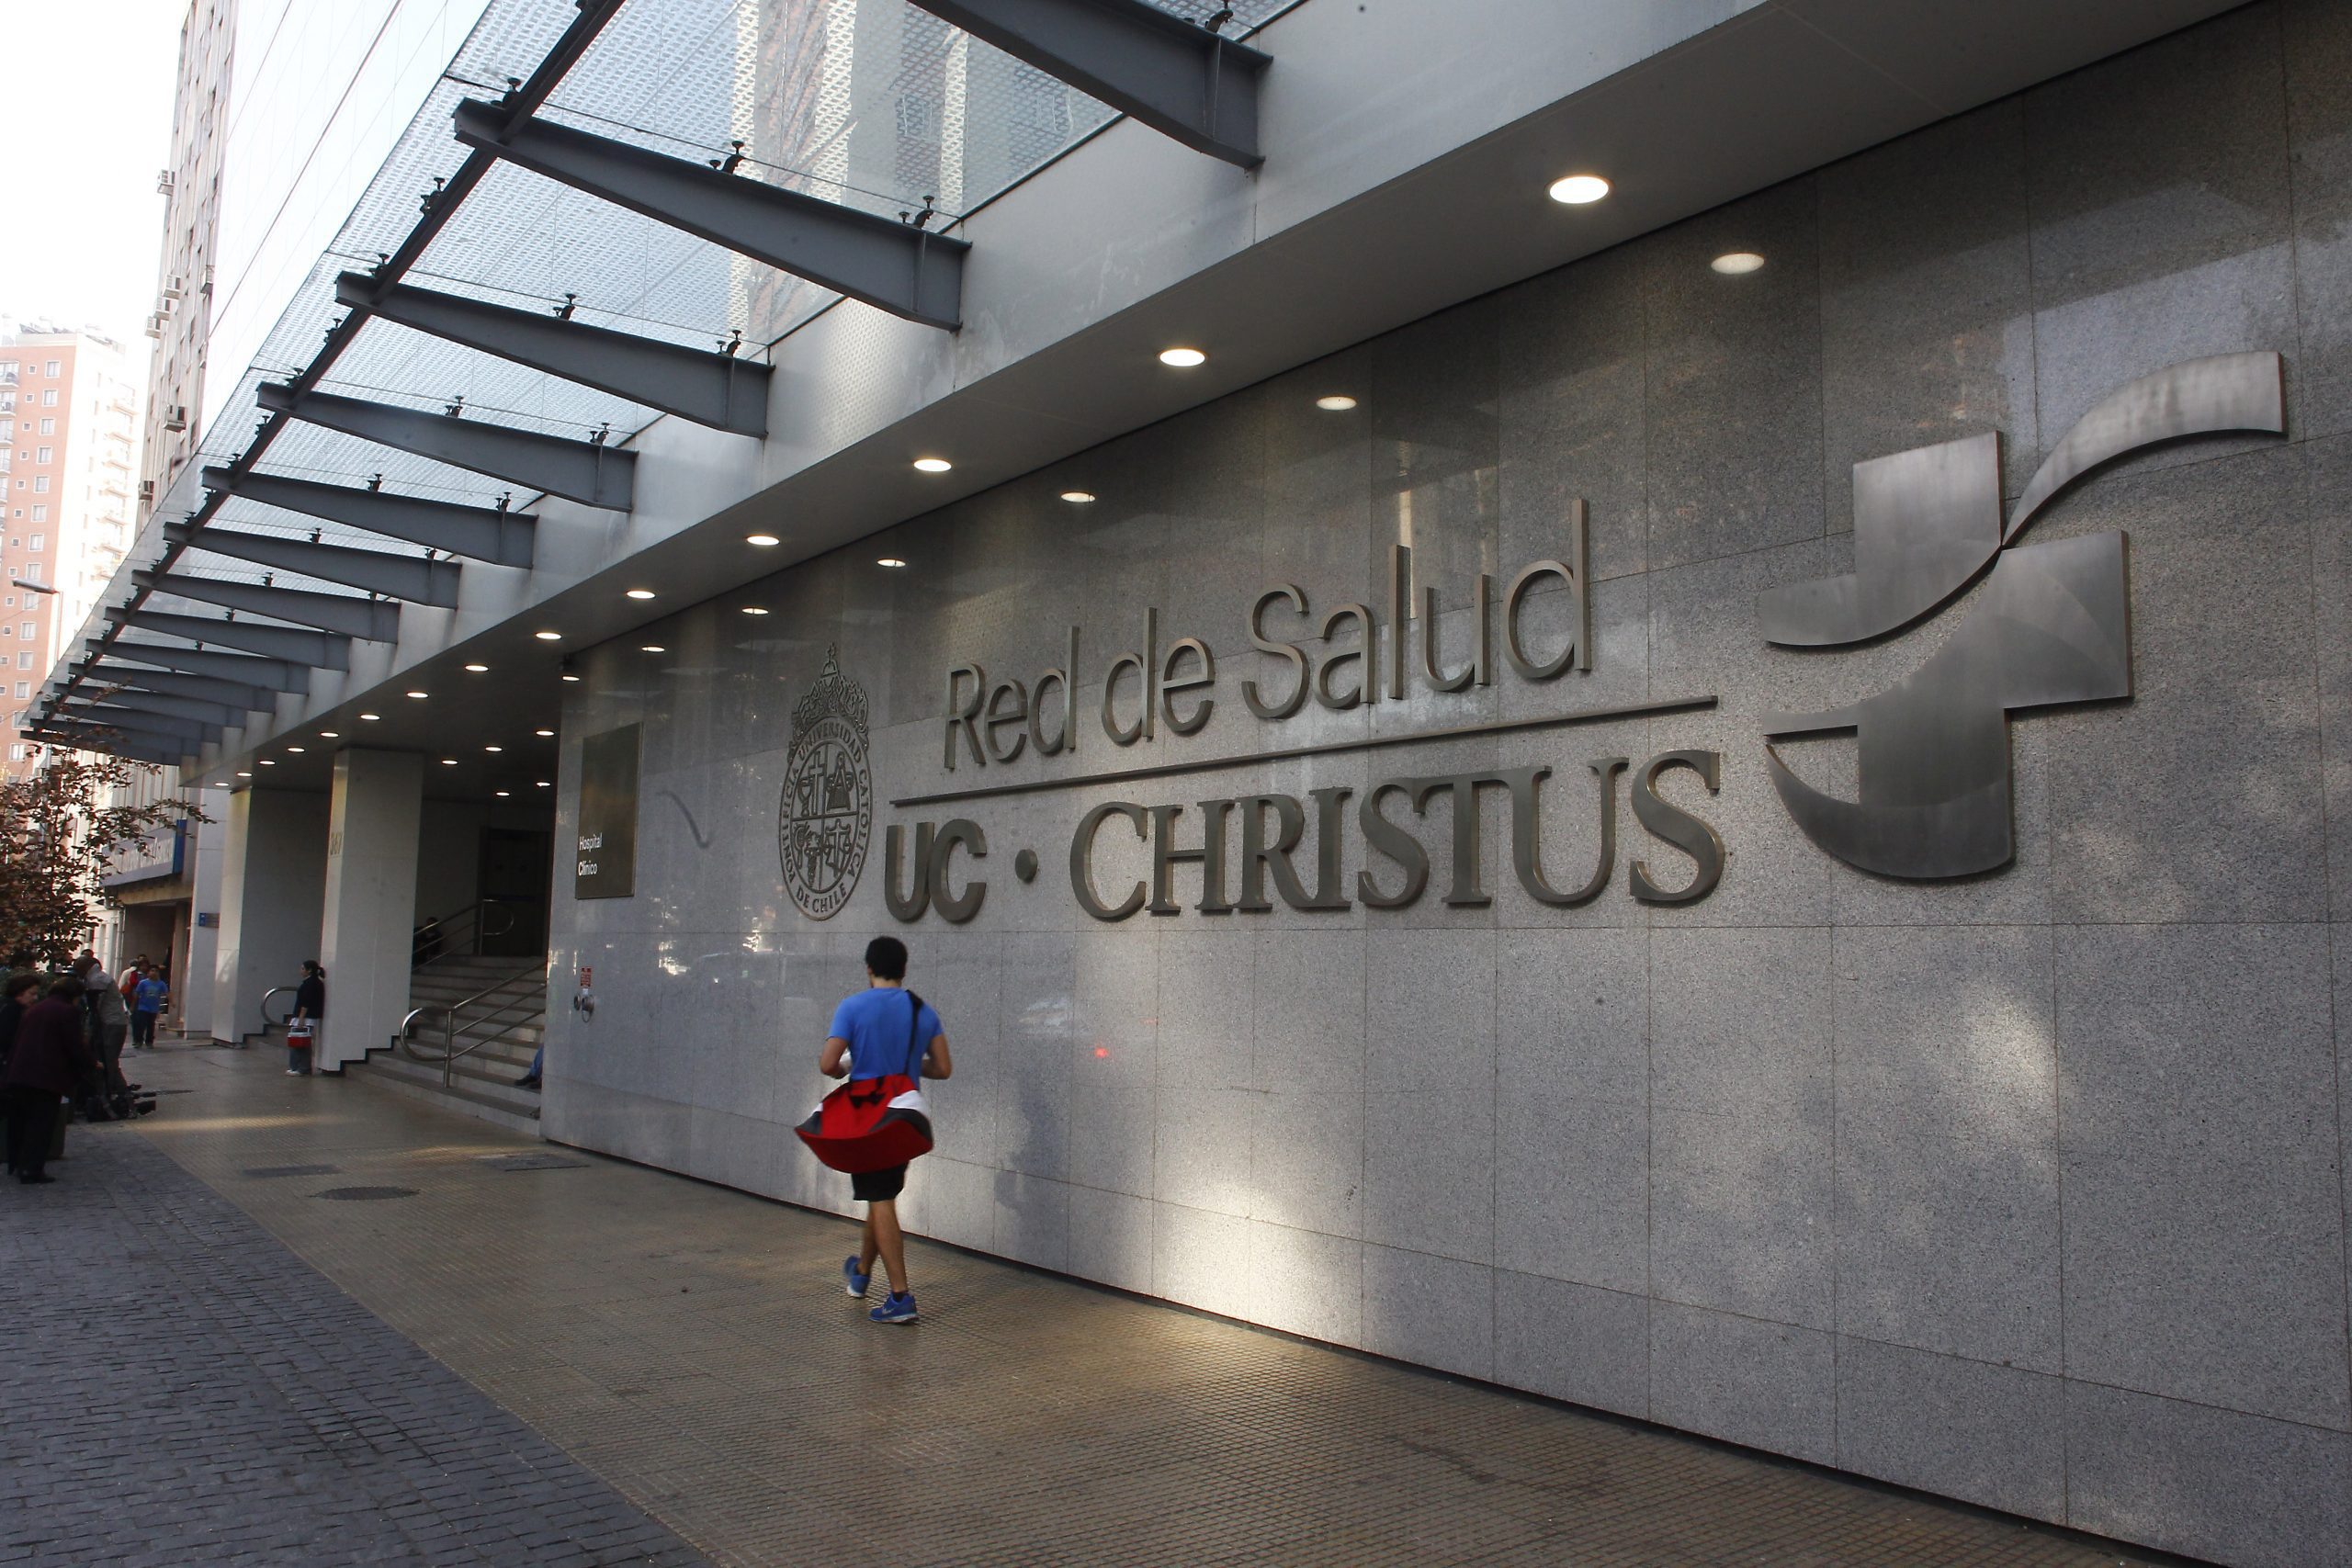 A photo of a man walking outside of the Red de Salud UC Christus facilities.